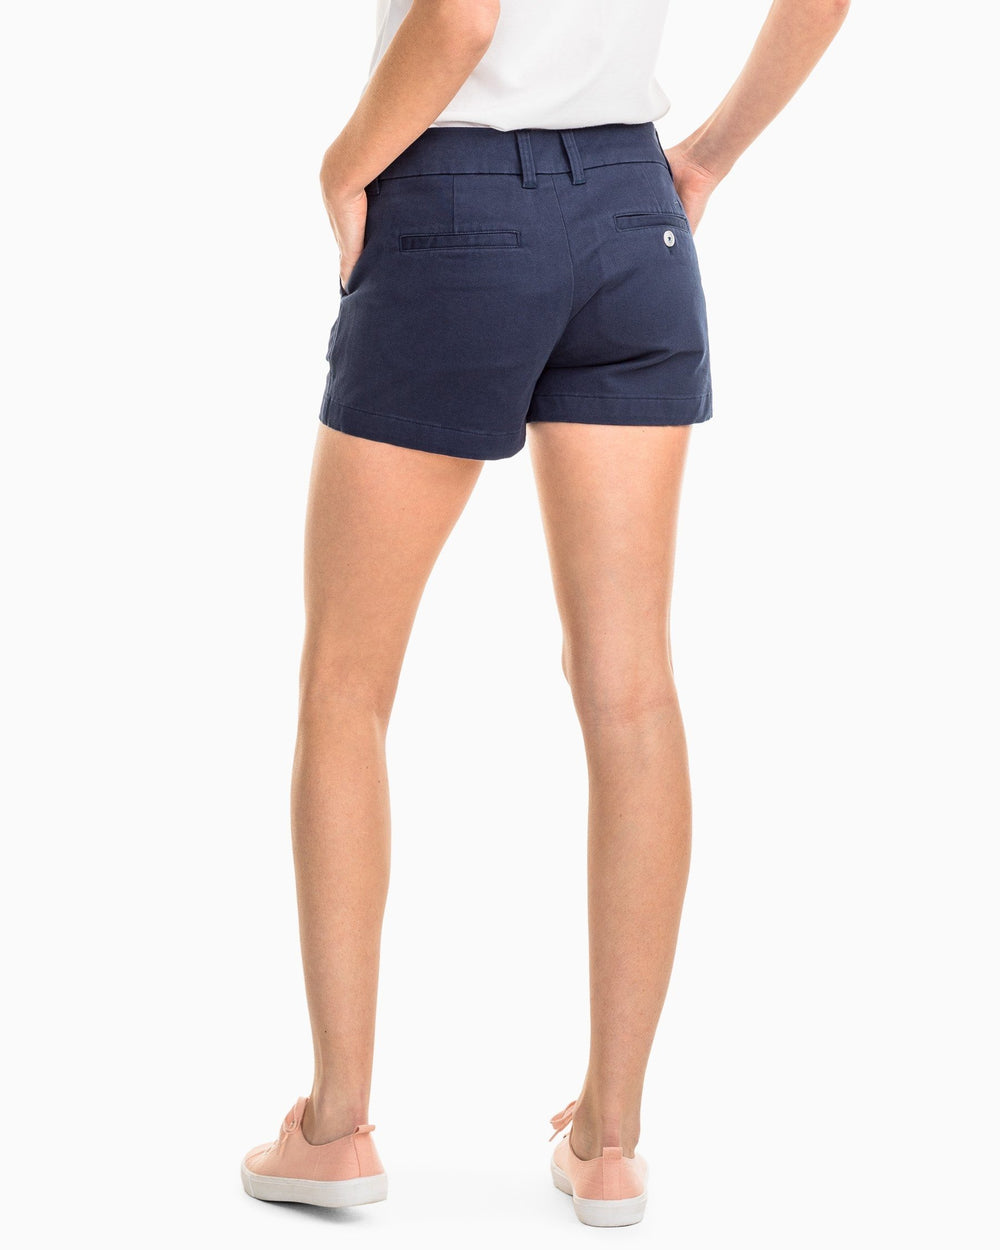 The back view of the Women's Navy 3 Inch Leah Short by Southern Tide - Nautical Navy